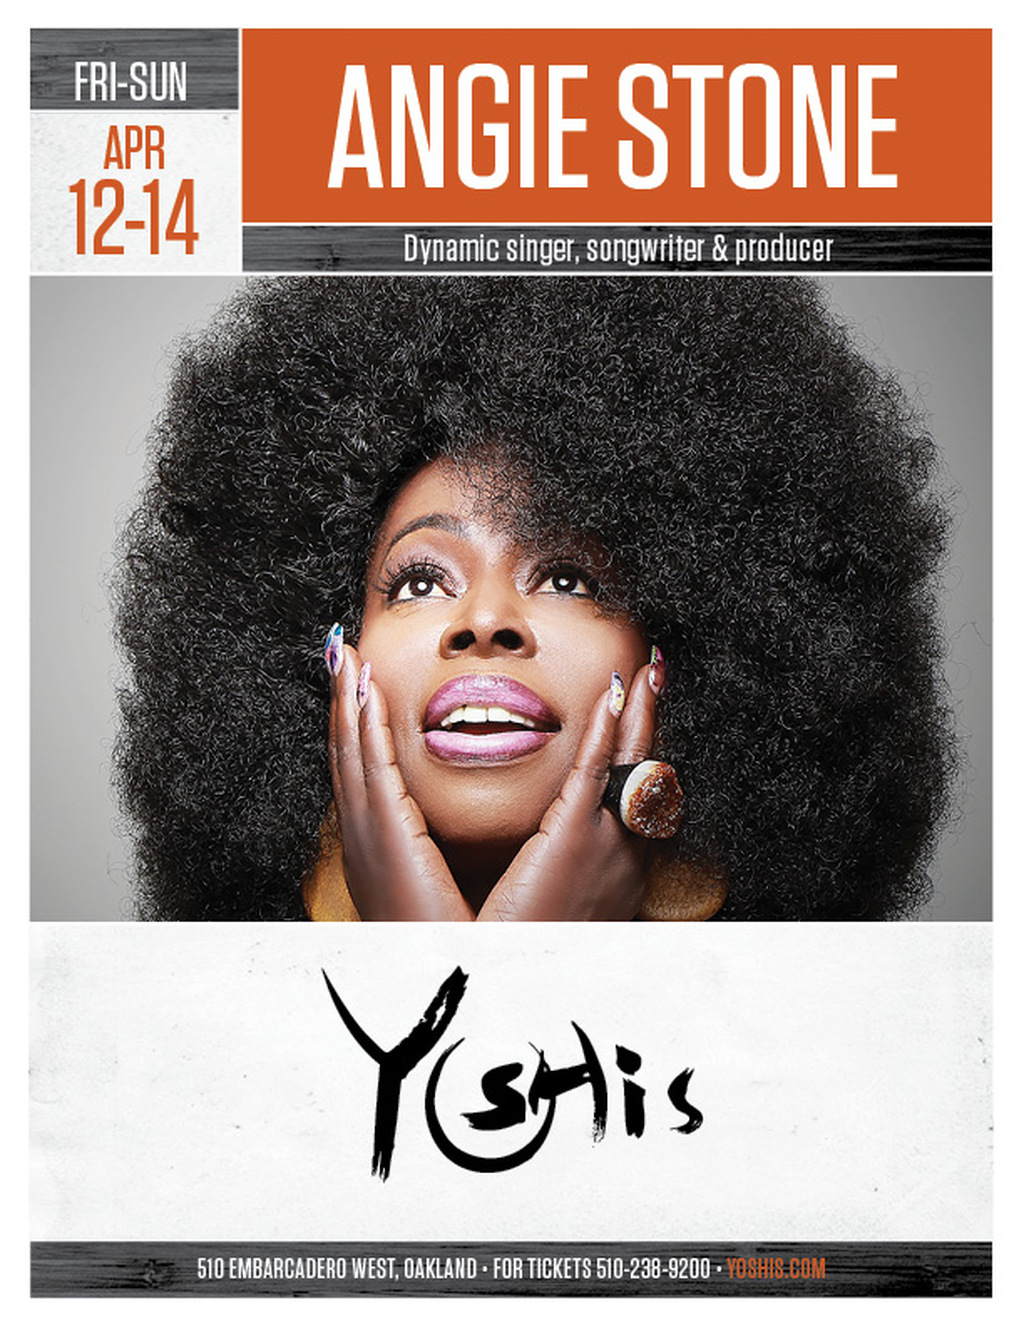 Yoshi s Experience the Dynamic Sounds of Angie Stone at Yoshi s promotion flier on Digifli com